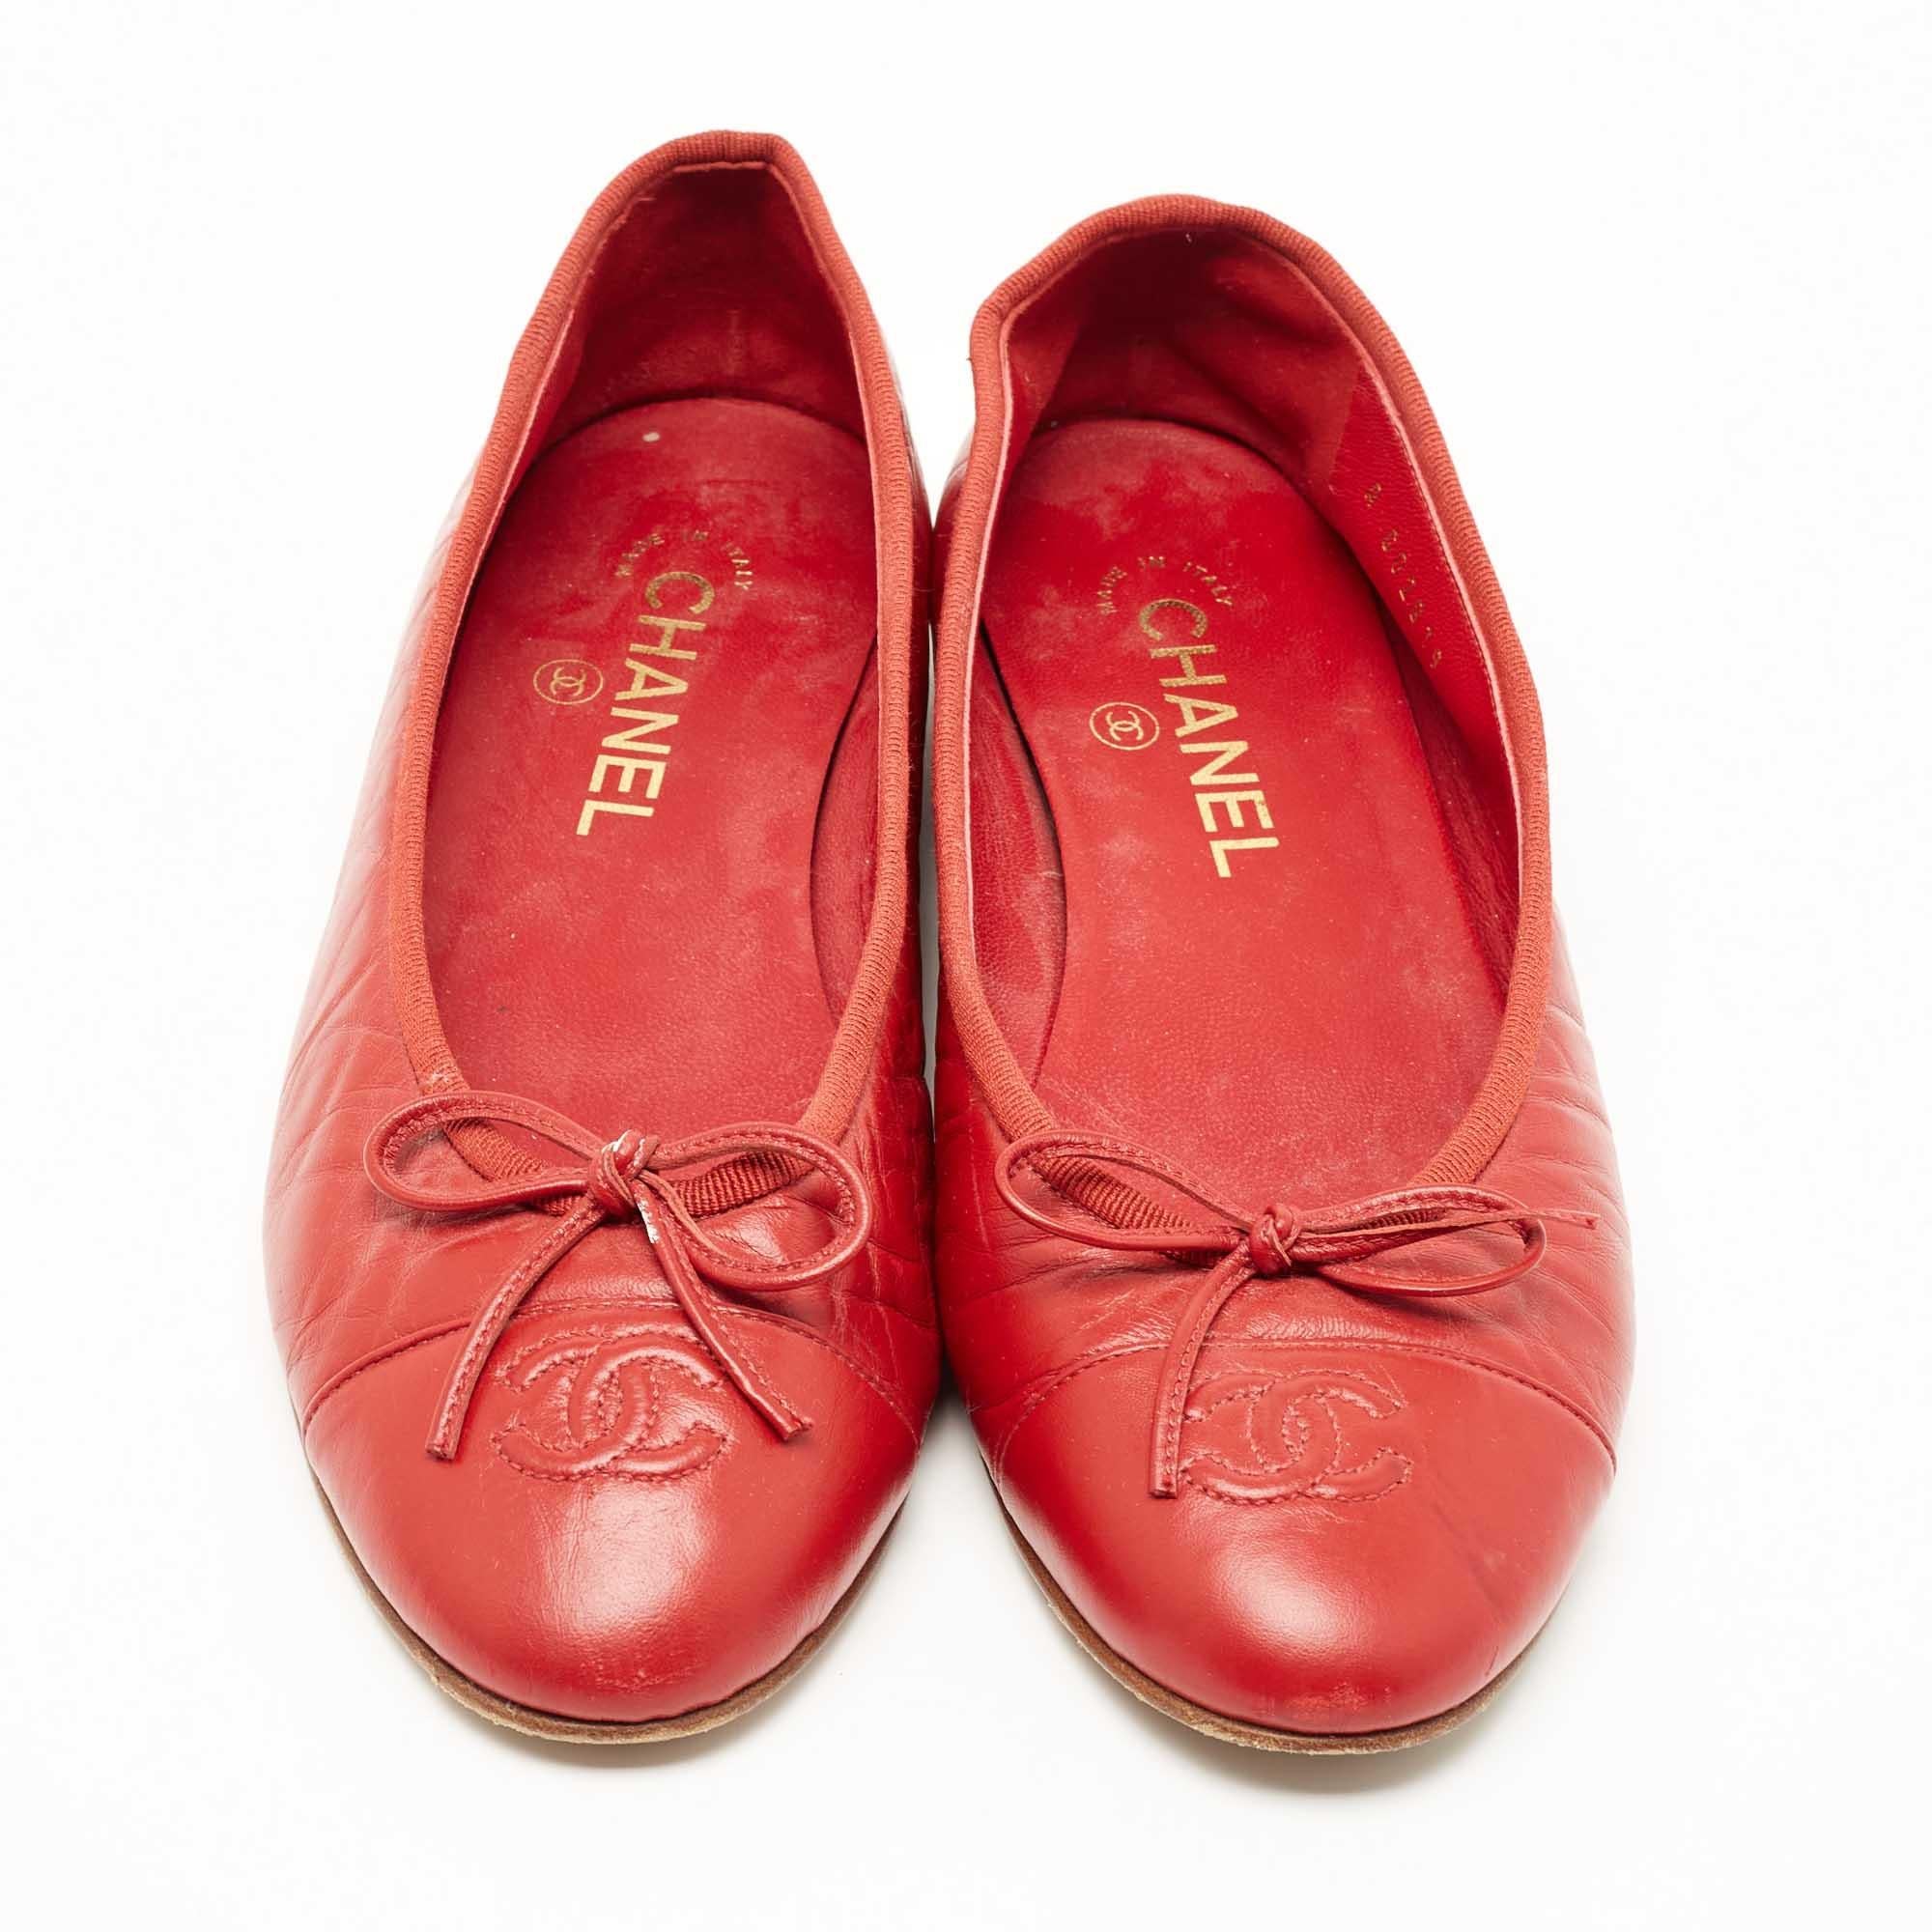 Women's Chanel Red Leather CC Bow Ballet Flats Size 38.5